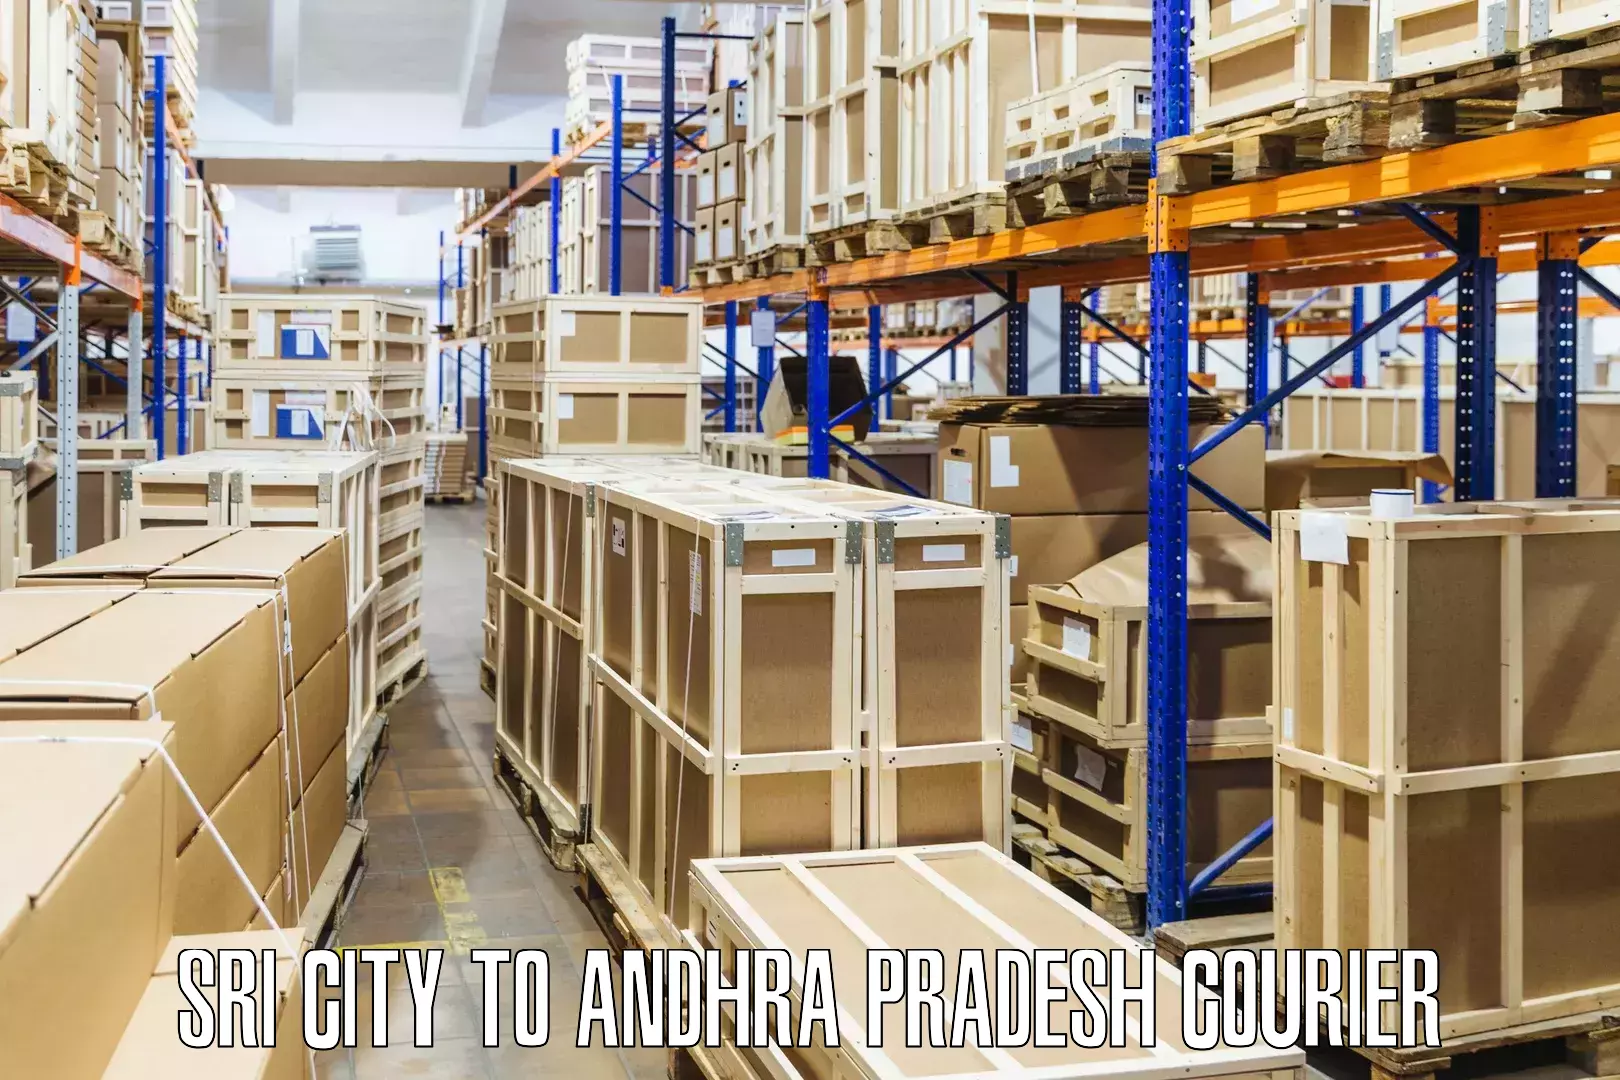 Discount courier rates in Sri City to Andhra Pradesh